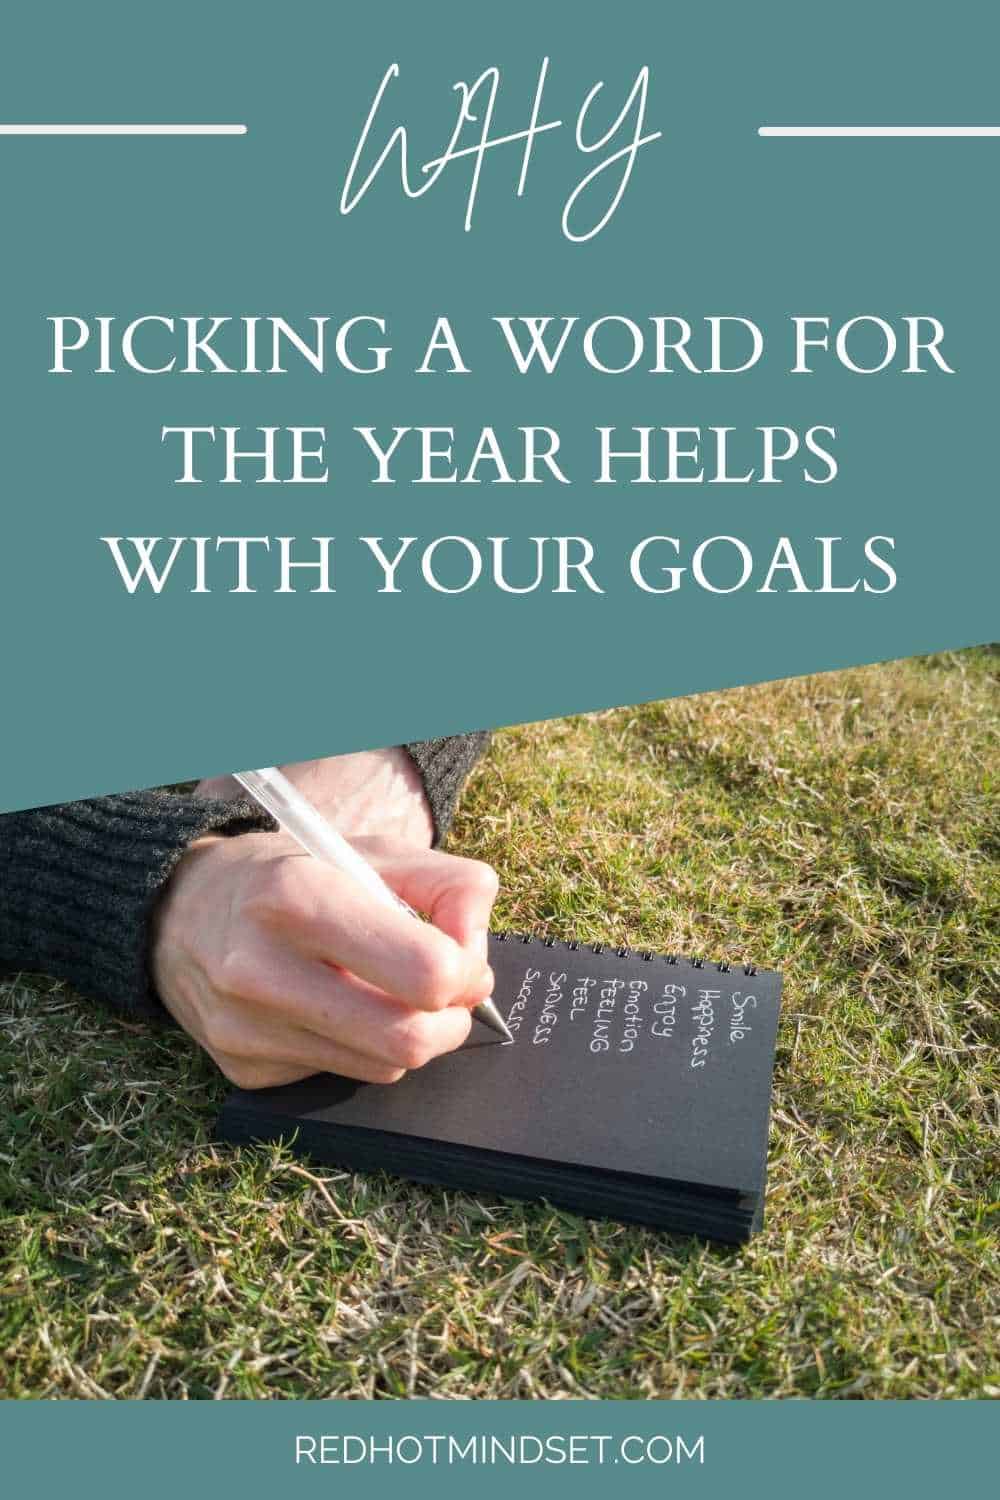 Ep 108 | How a Word for the Year Can Help You Find Focus, Create Intention, and Take Action